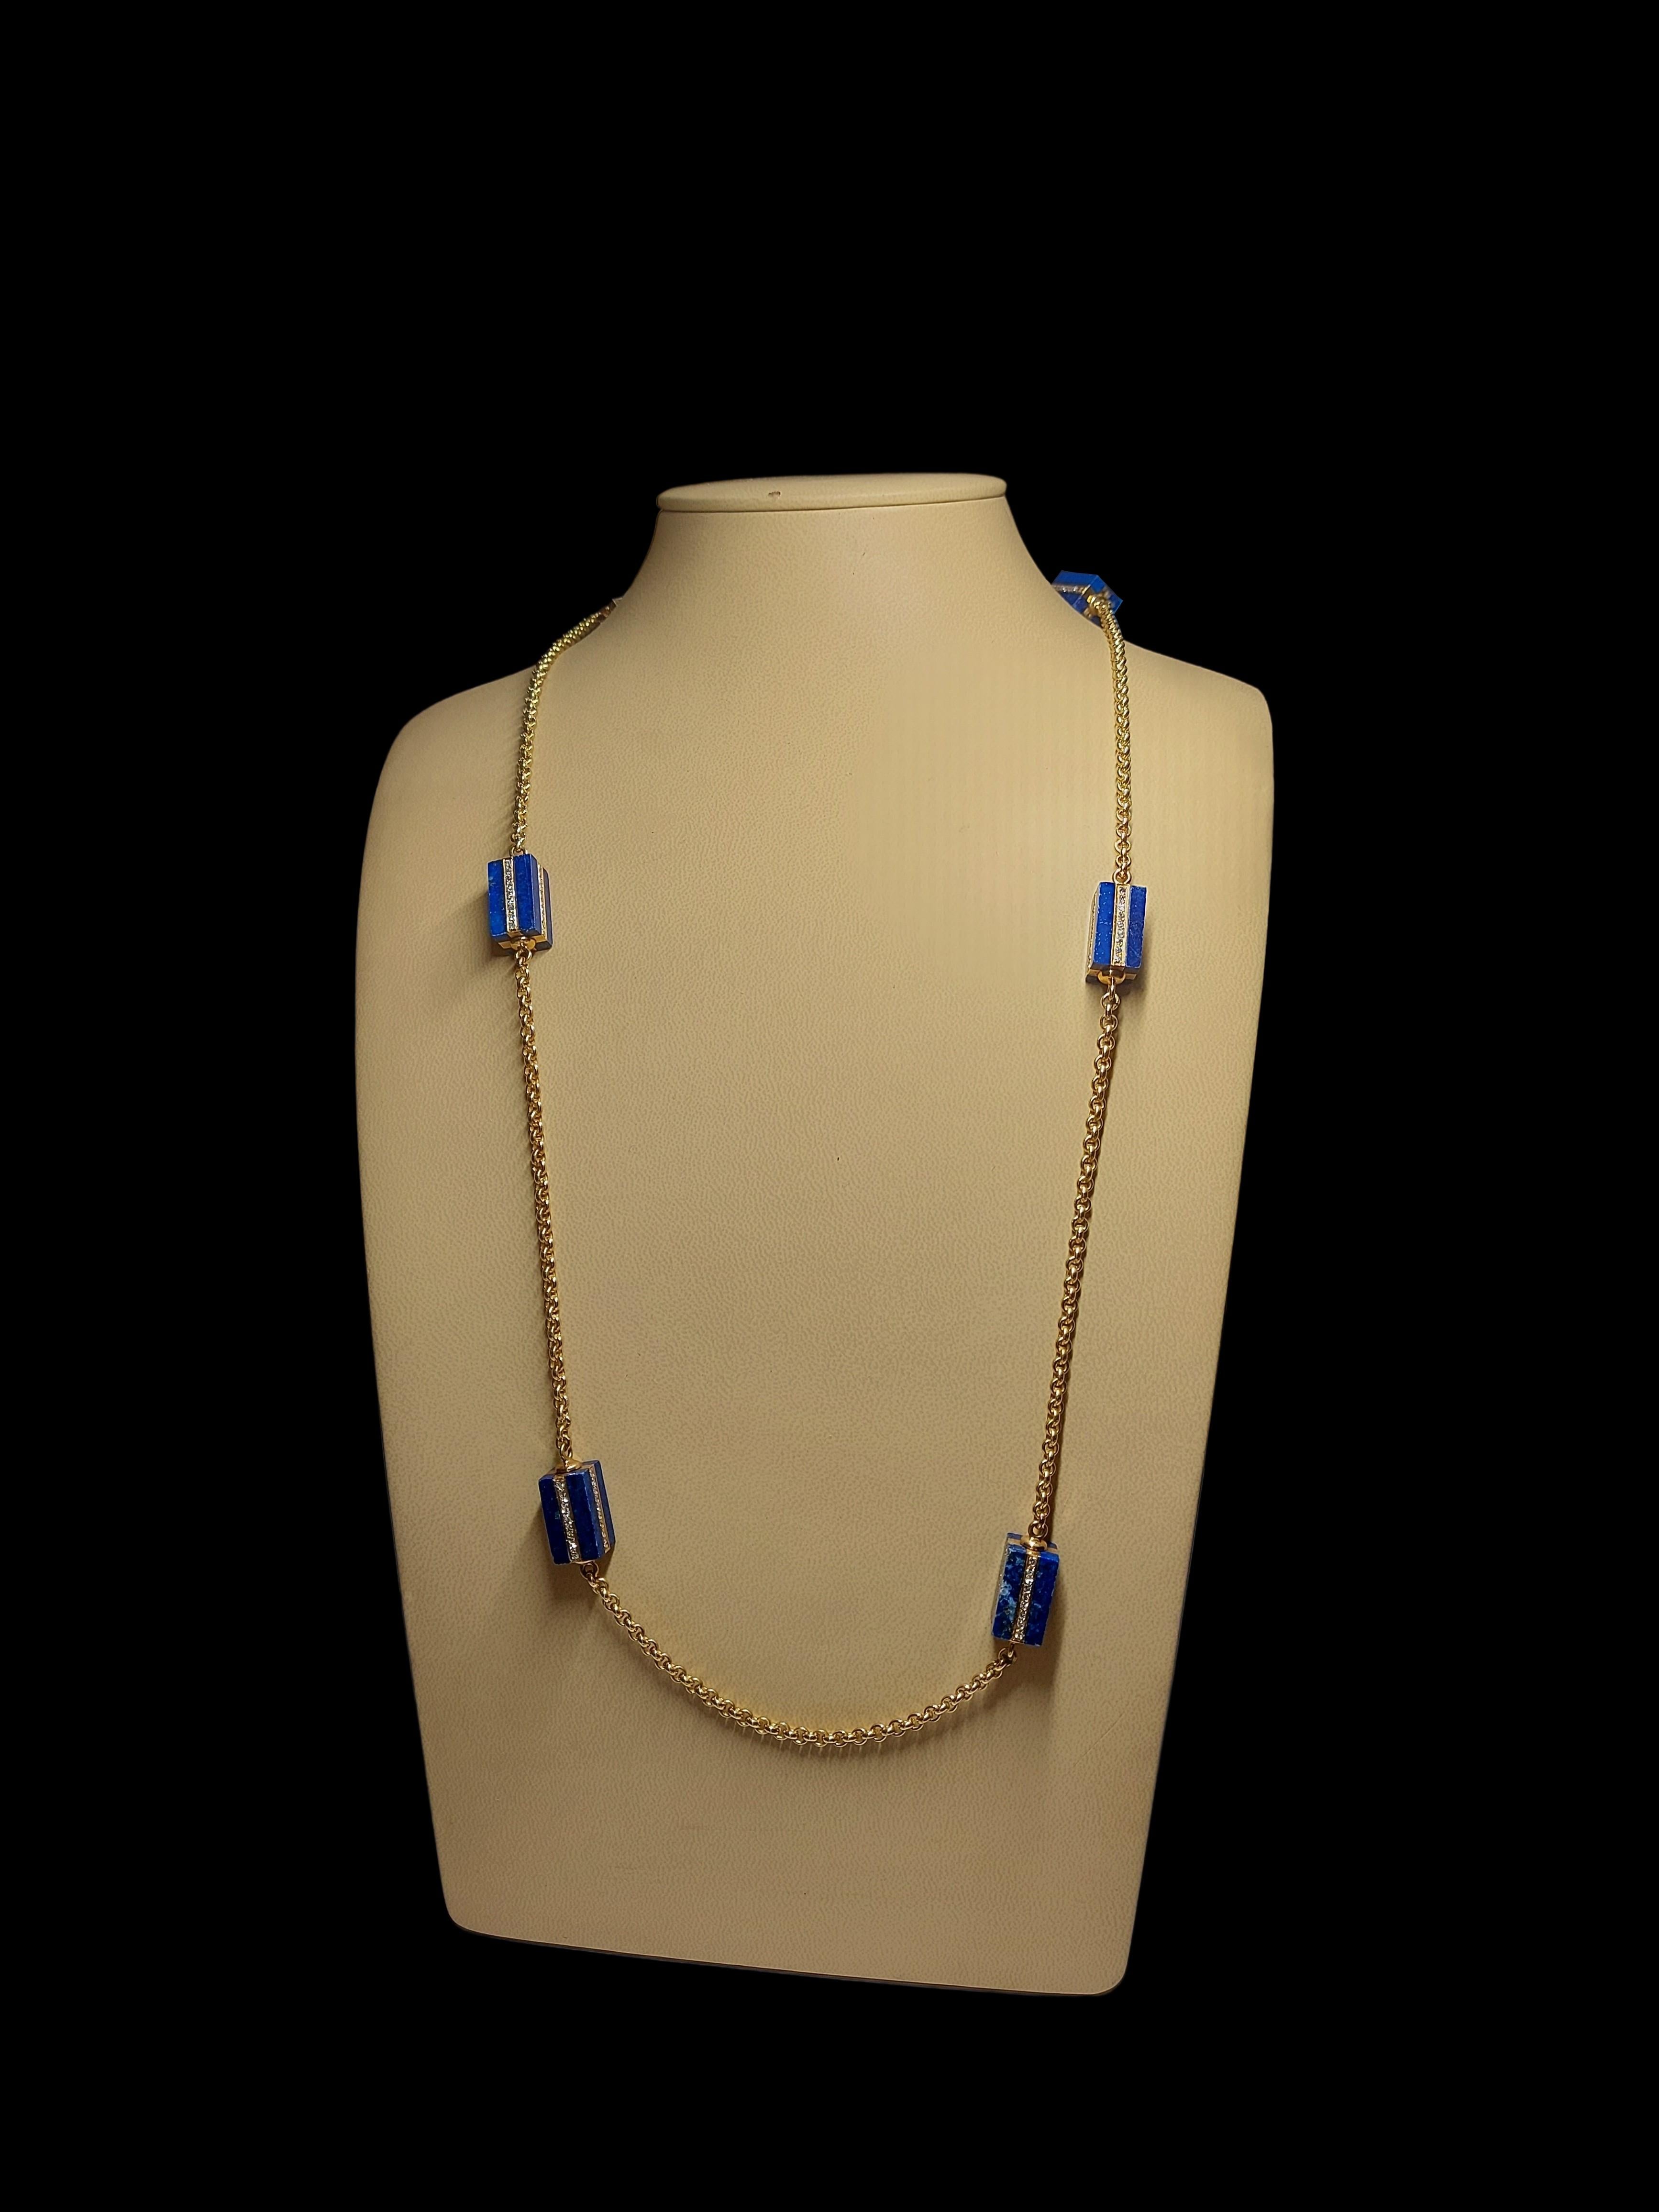 Women's or Men's Long Necklace with Lapis Lazuli and 4.32 Ct Diamonds, Estate Sultan Oman Qaboos For Sale